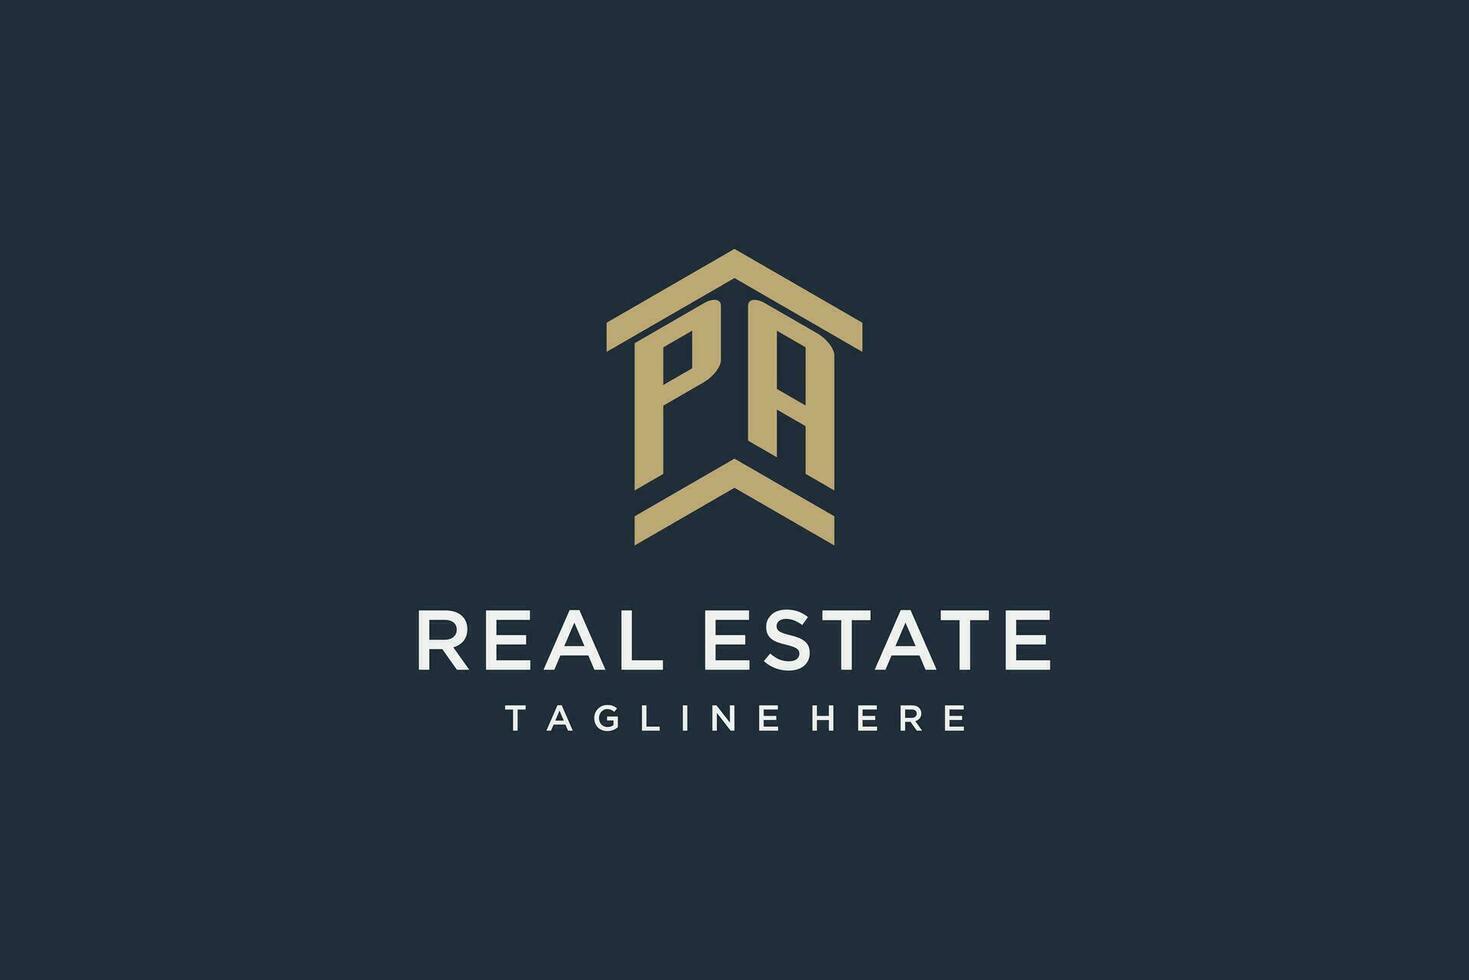 Initial PA logo for real estate with simple and creative house roof icon logo design ideas vector